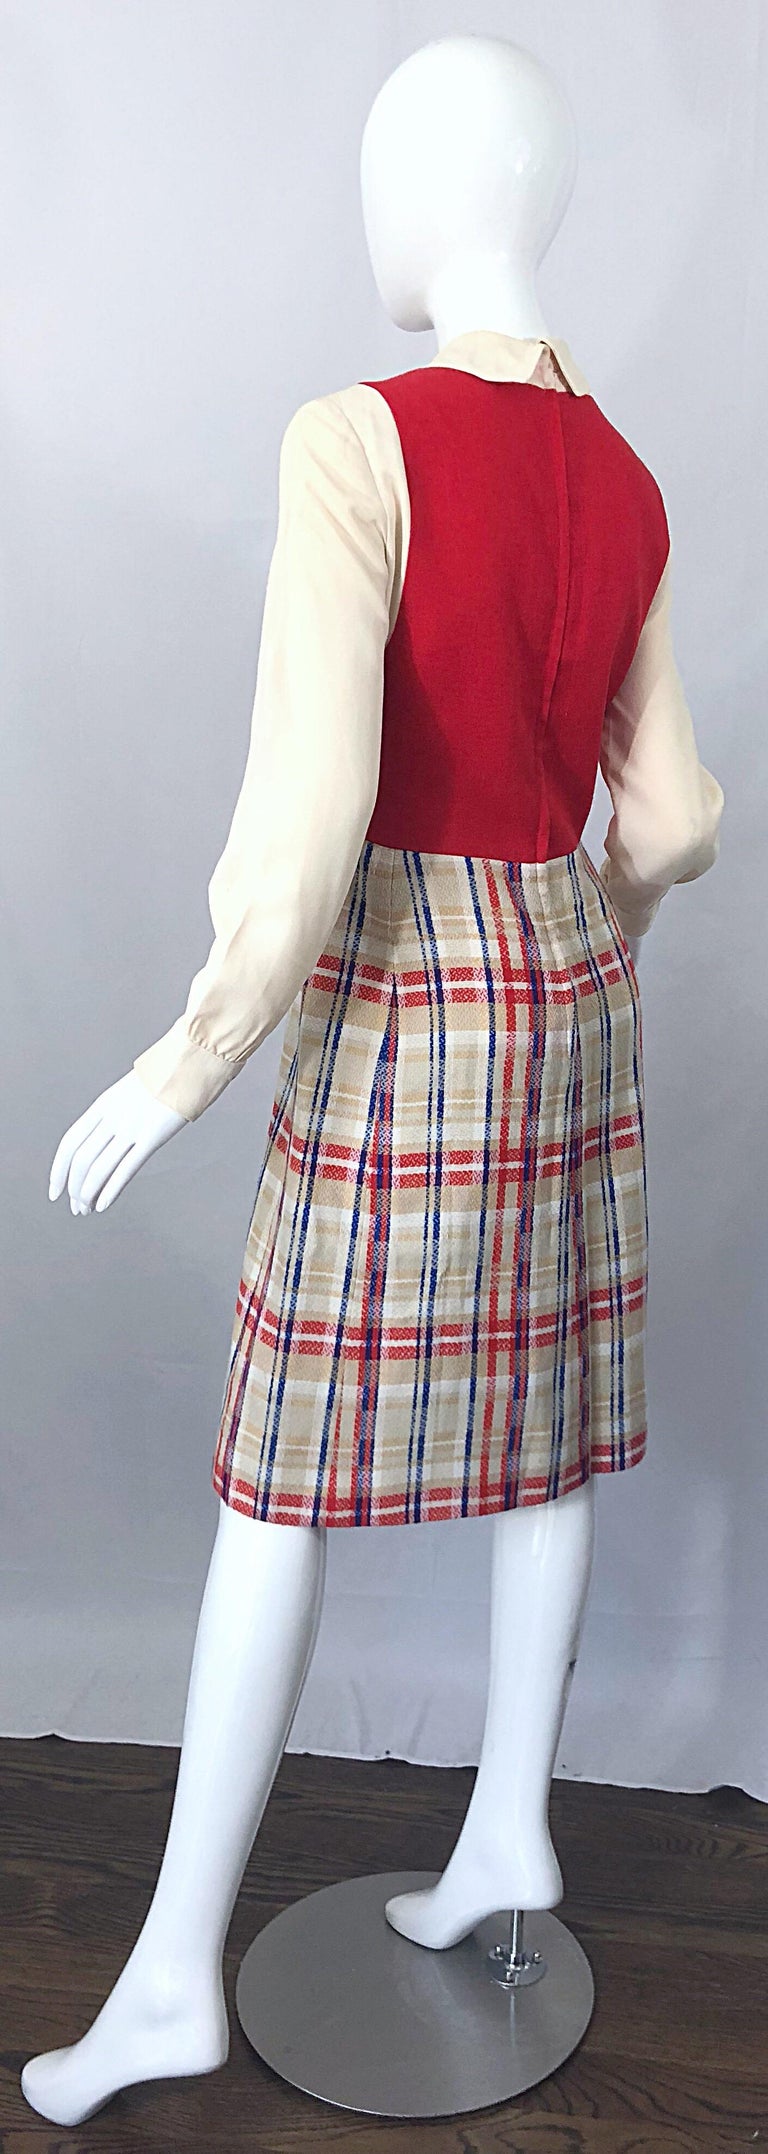 Chic 1960s Pat Sandler Trompe l'Oeil Red White and Blue Vintage 60s A Line Dress For Sale 6